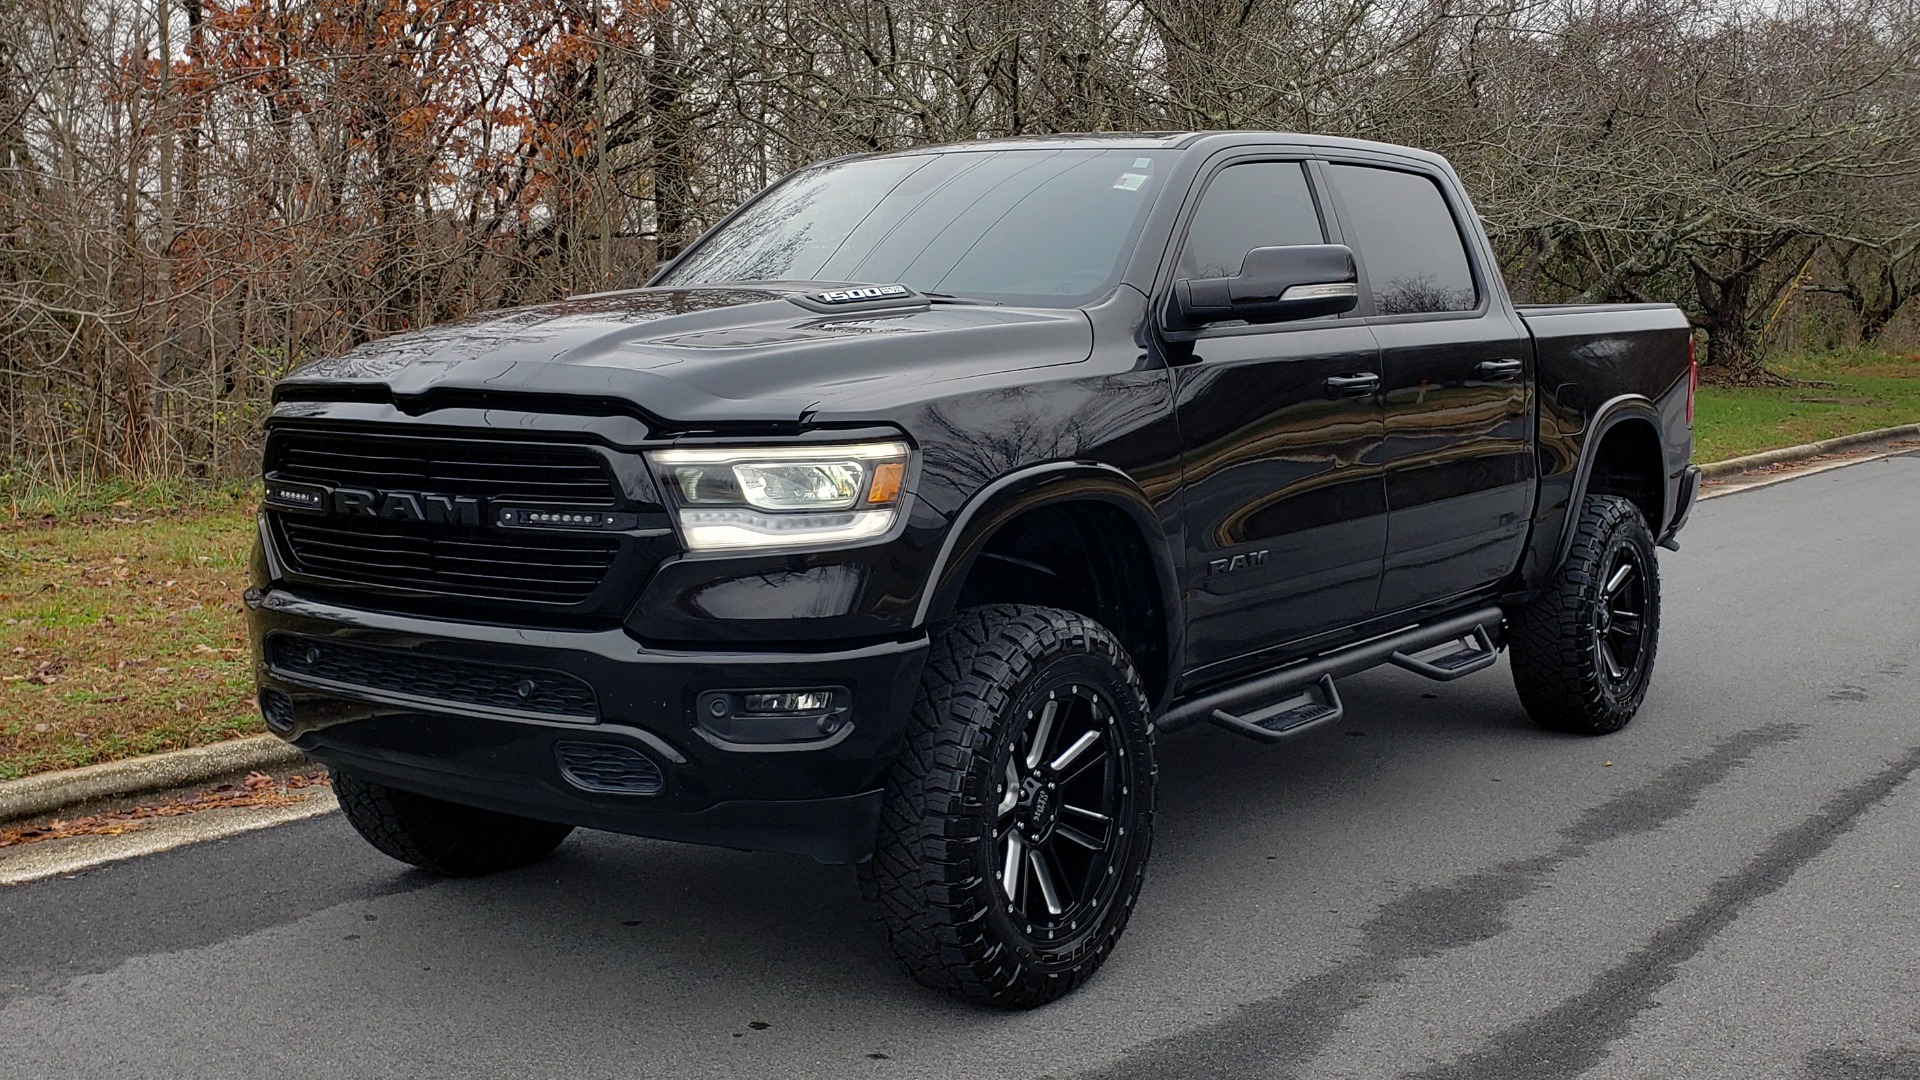 Used 2019 Ram 1500 LARAMIE SPORT / 2WD / 5.7L HEMI / NAV / BLIND SPOT / HTD STS / REARVIEW for sale Sold at Formula Imports in Charlotte NC 28227 1